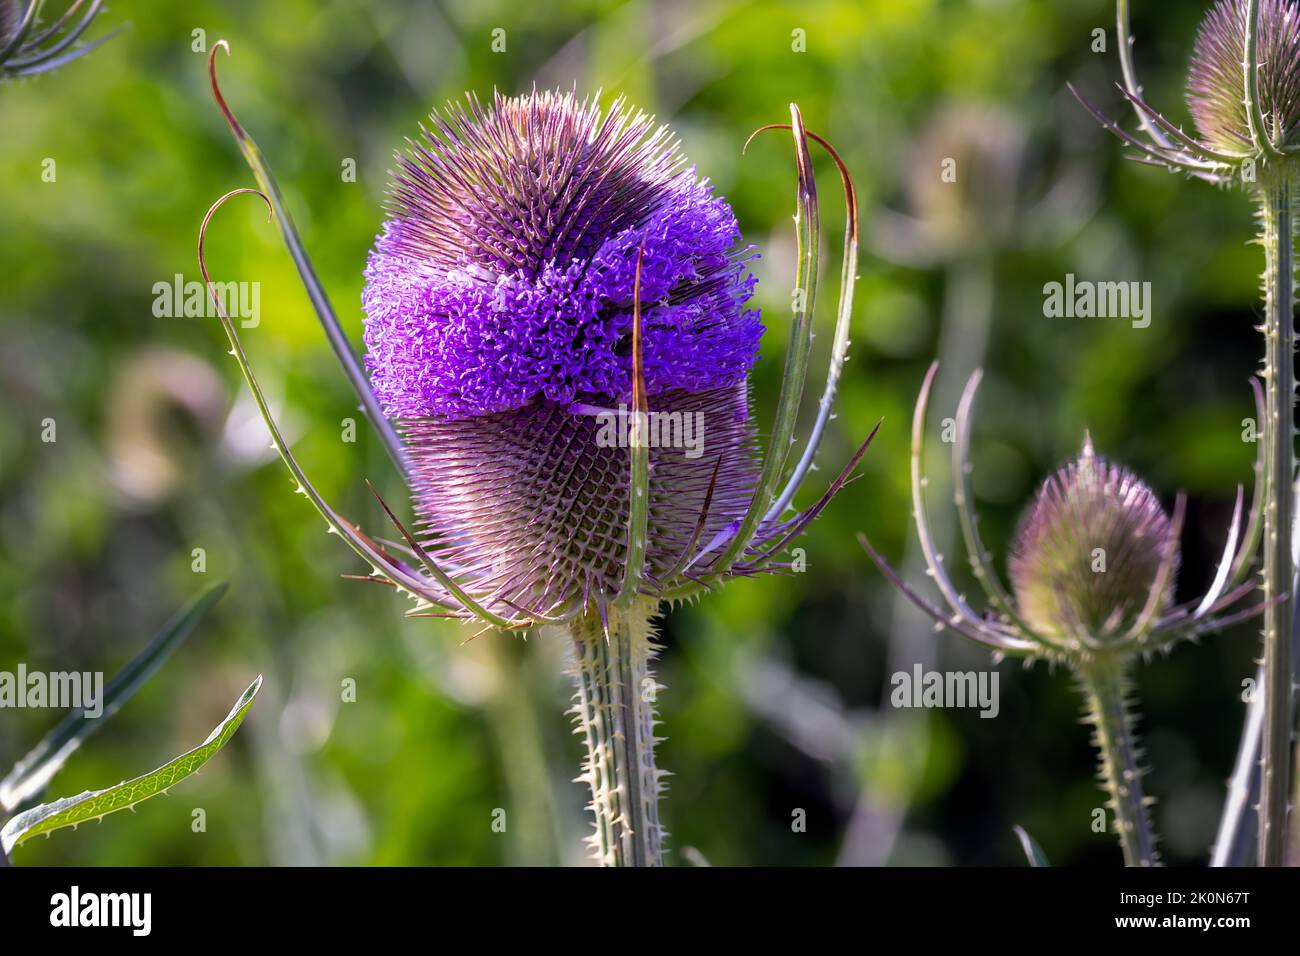 Purple common teasel or Dipsacus fullonum L. flower in summer, close up Stock Photo